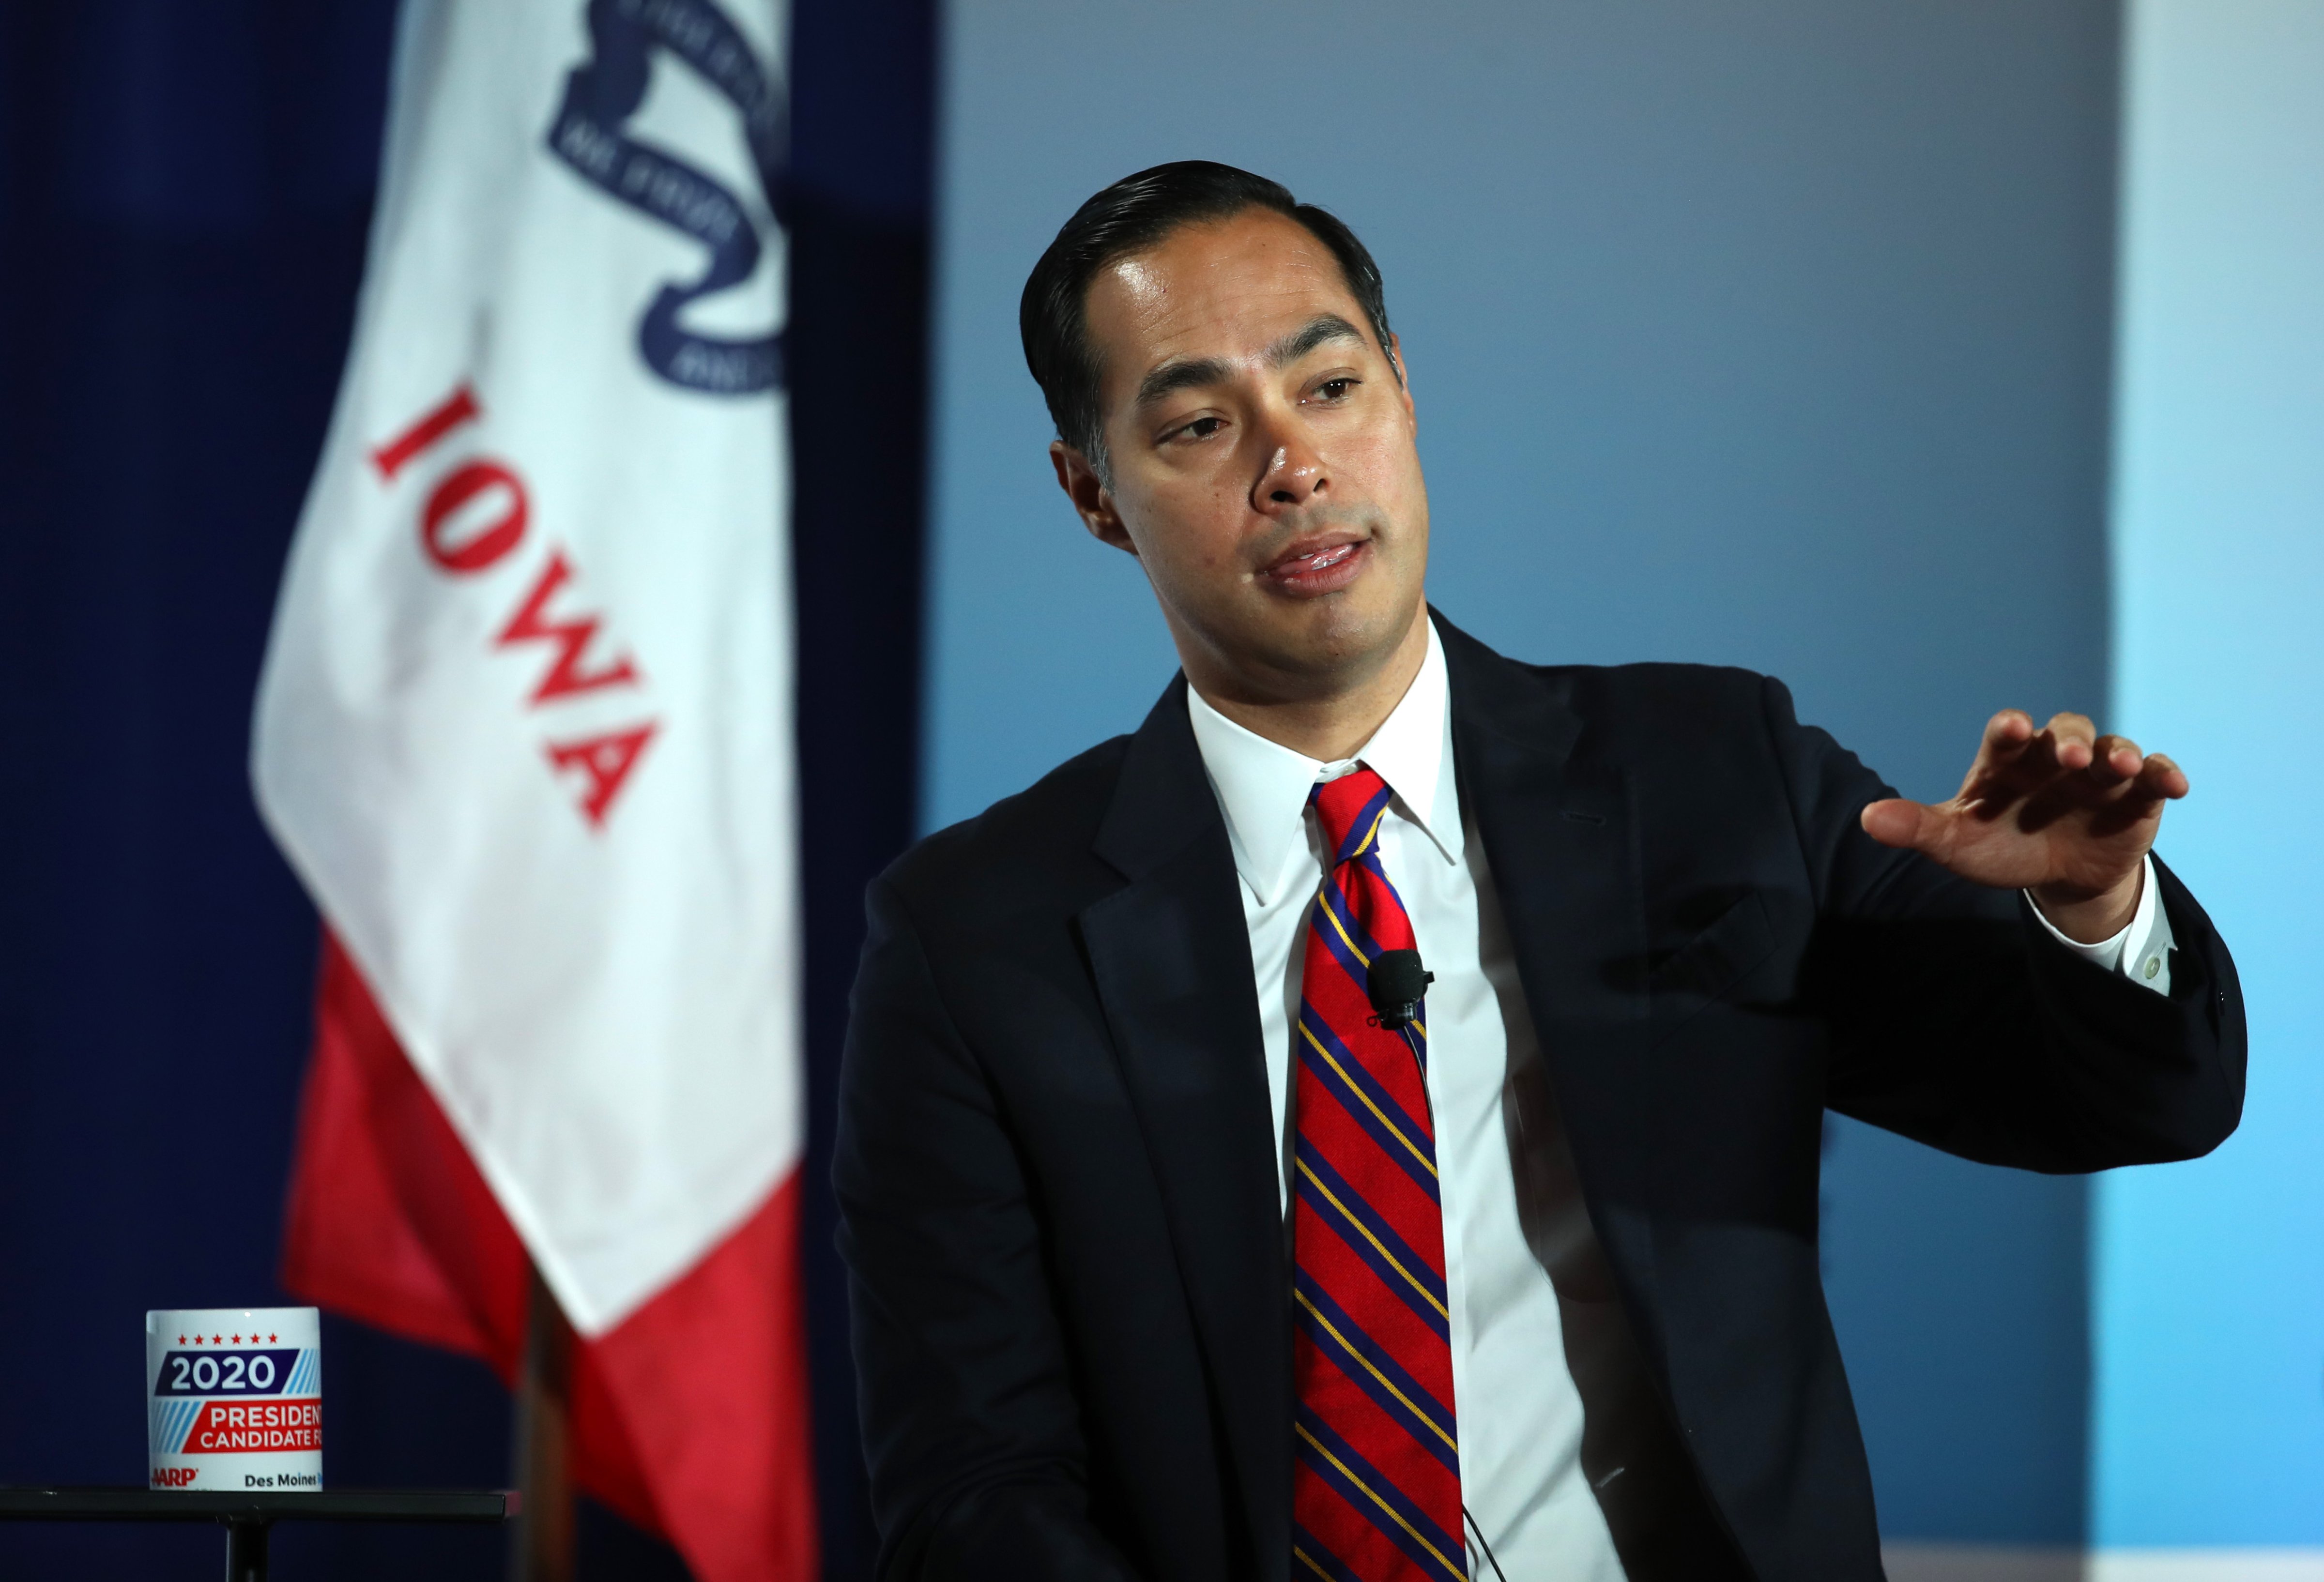 Democratic presidential candidate former U.S. Secretary of Housing and Urban Development Julian Castro speaks during the AARP and The Des Moines Register Iowa Presidential Candidate Forum on July 16, 2019 in Bettendorf, Iowa. (Justin Sullivan—Getty Images)